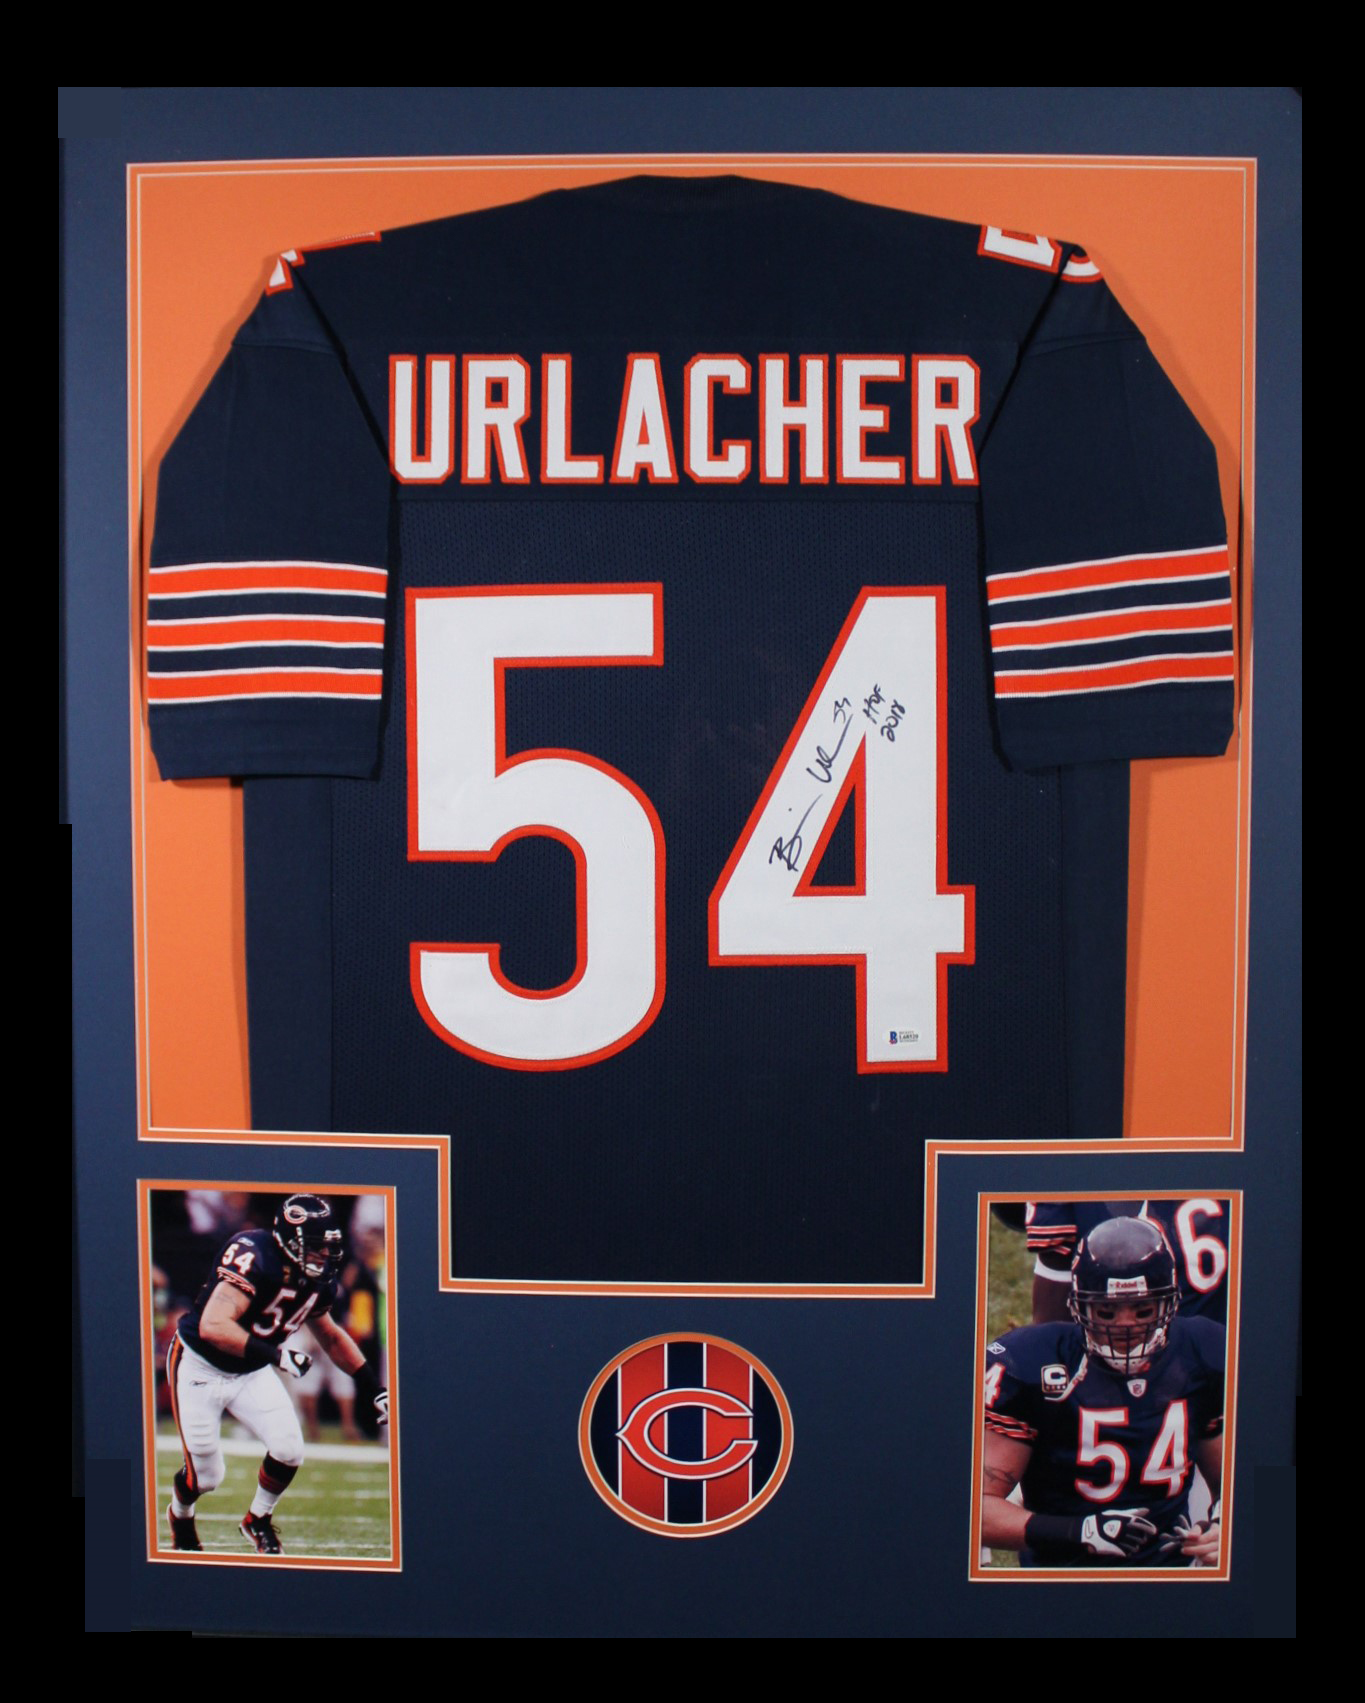 Sports Autographed Jersey Framing Pro Style (7-10 day turnaround)